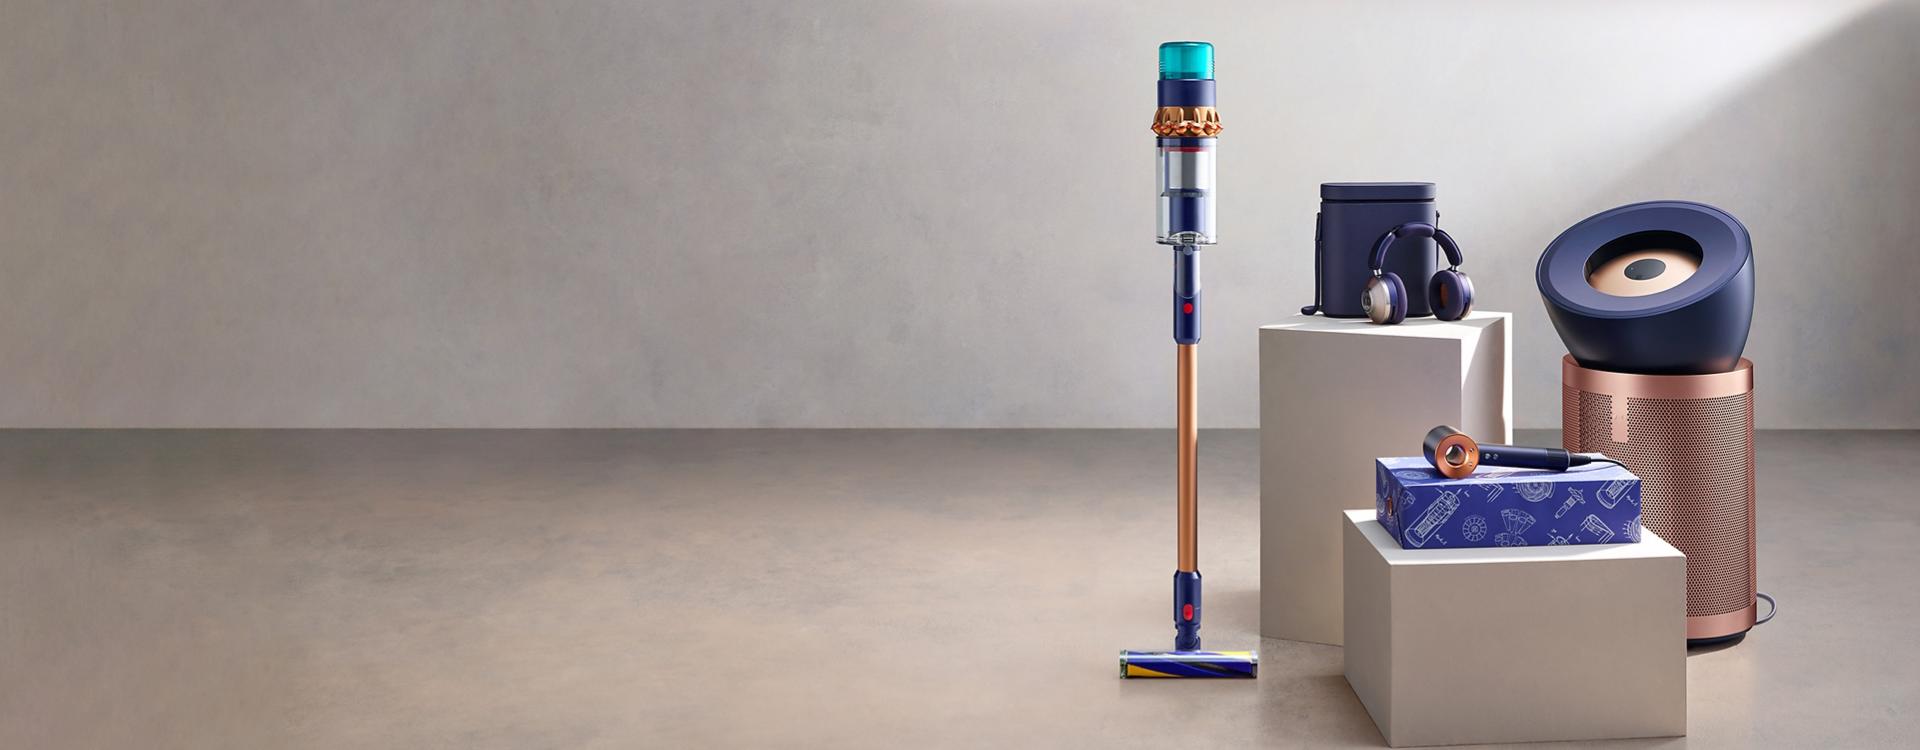 Dyson technology displayed in exclusive colours